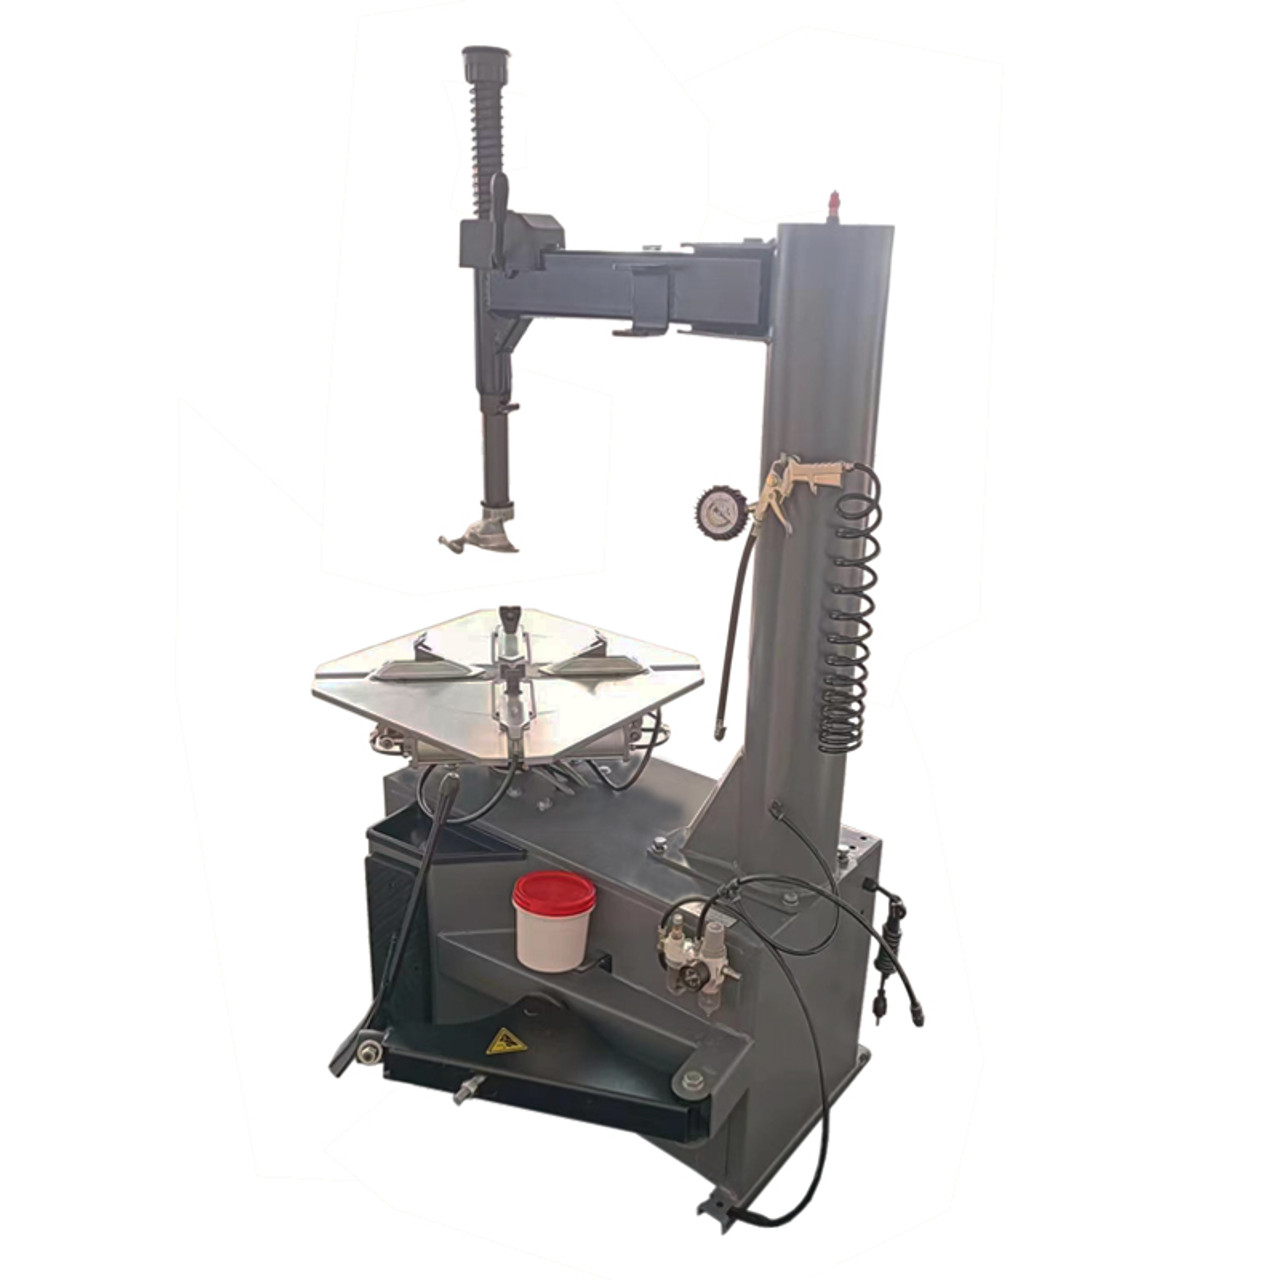 CAE-2765EZ Tire Changer with Pneumatic Lock Lever & Right Hand Assist & CAE-3224 2D Wheel Balancer with Automatic Entry